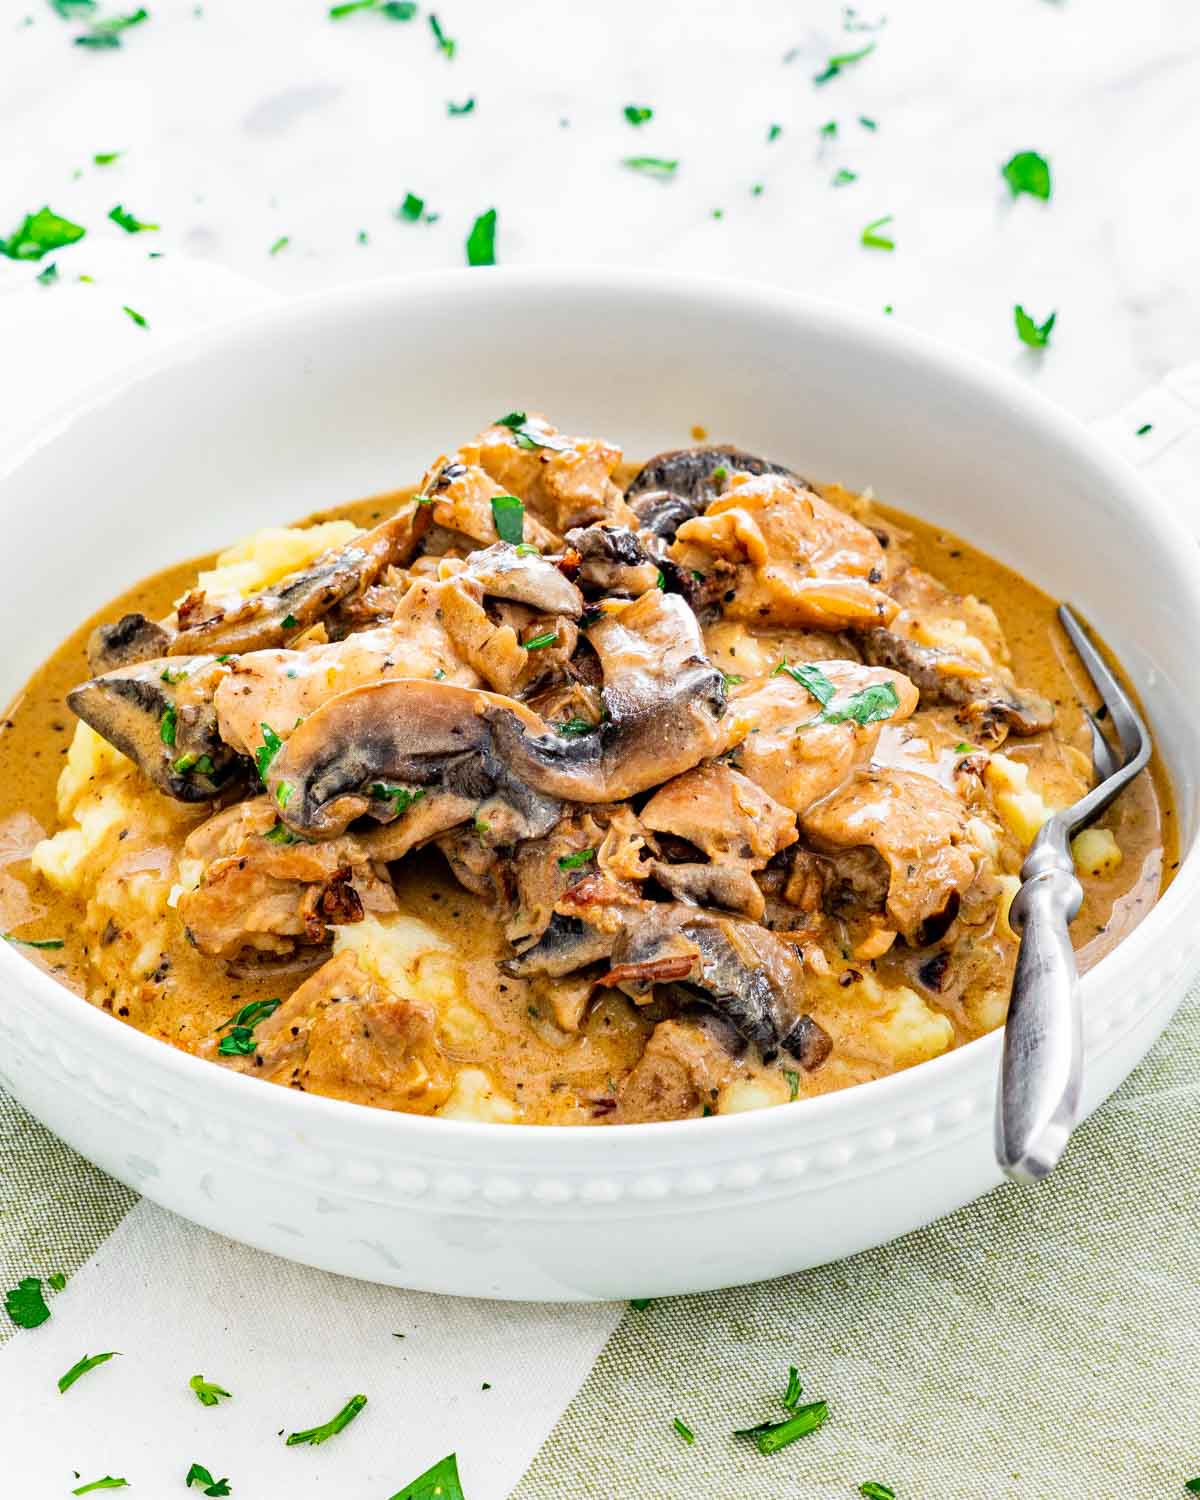 chicken and mushrooms in a rich sour cream sauce over mashed potatoes in a white bowl